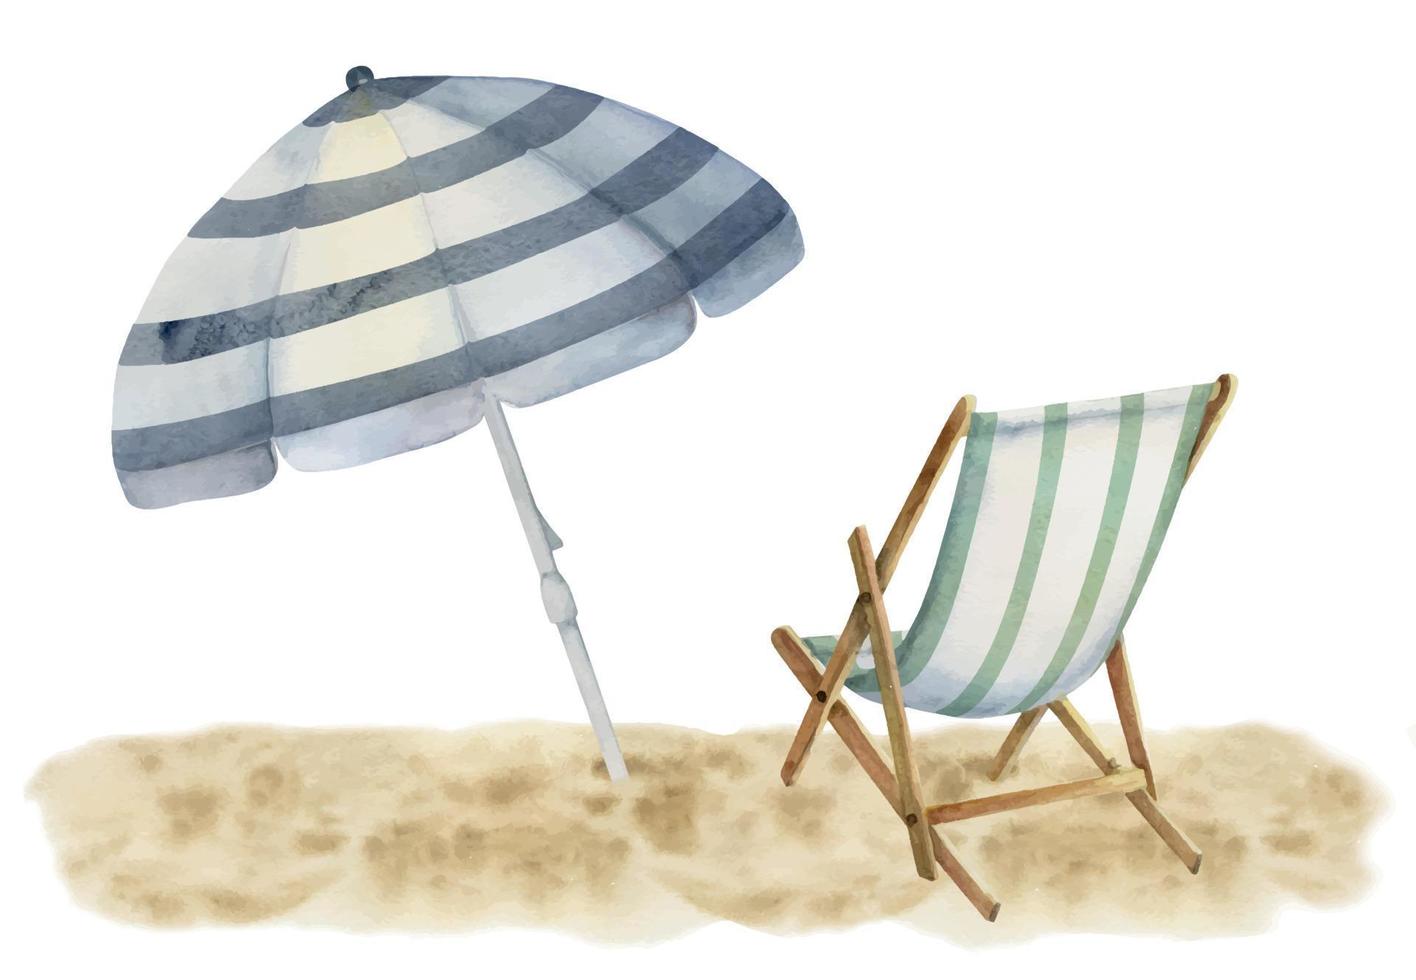 Hand drawn watercolor composition. Striped beach accessories, umbrellas and chairs on sand. Isolated on white background. Design wall art, wedding, print, fabric, cover, card, tourism, travel booklet. vector